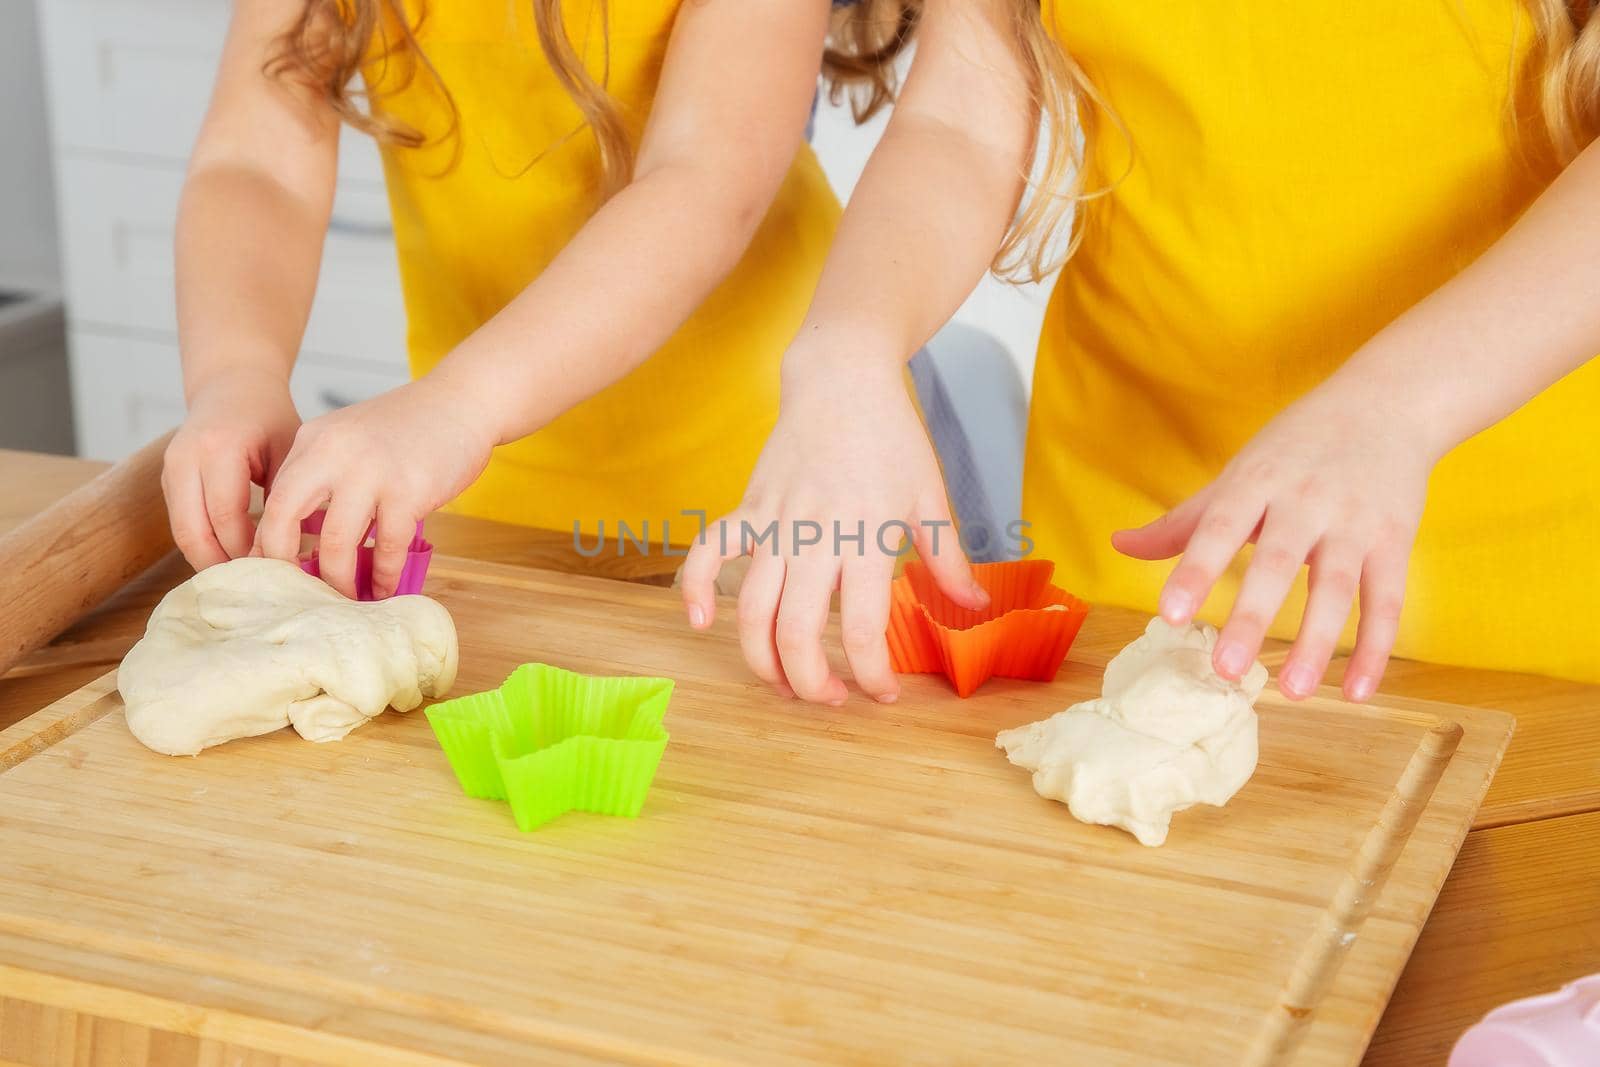 Two sisters of Caucasian appearance prepare cookies in the kitchen using a wooden cutting board, rolling pin and molds. Cropped frame of children in yellow aprons.